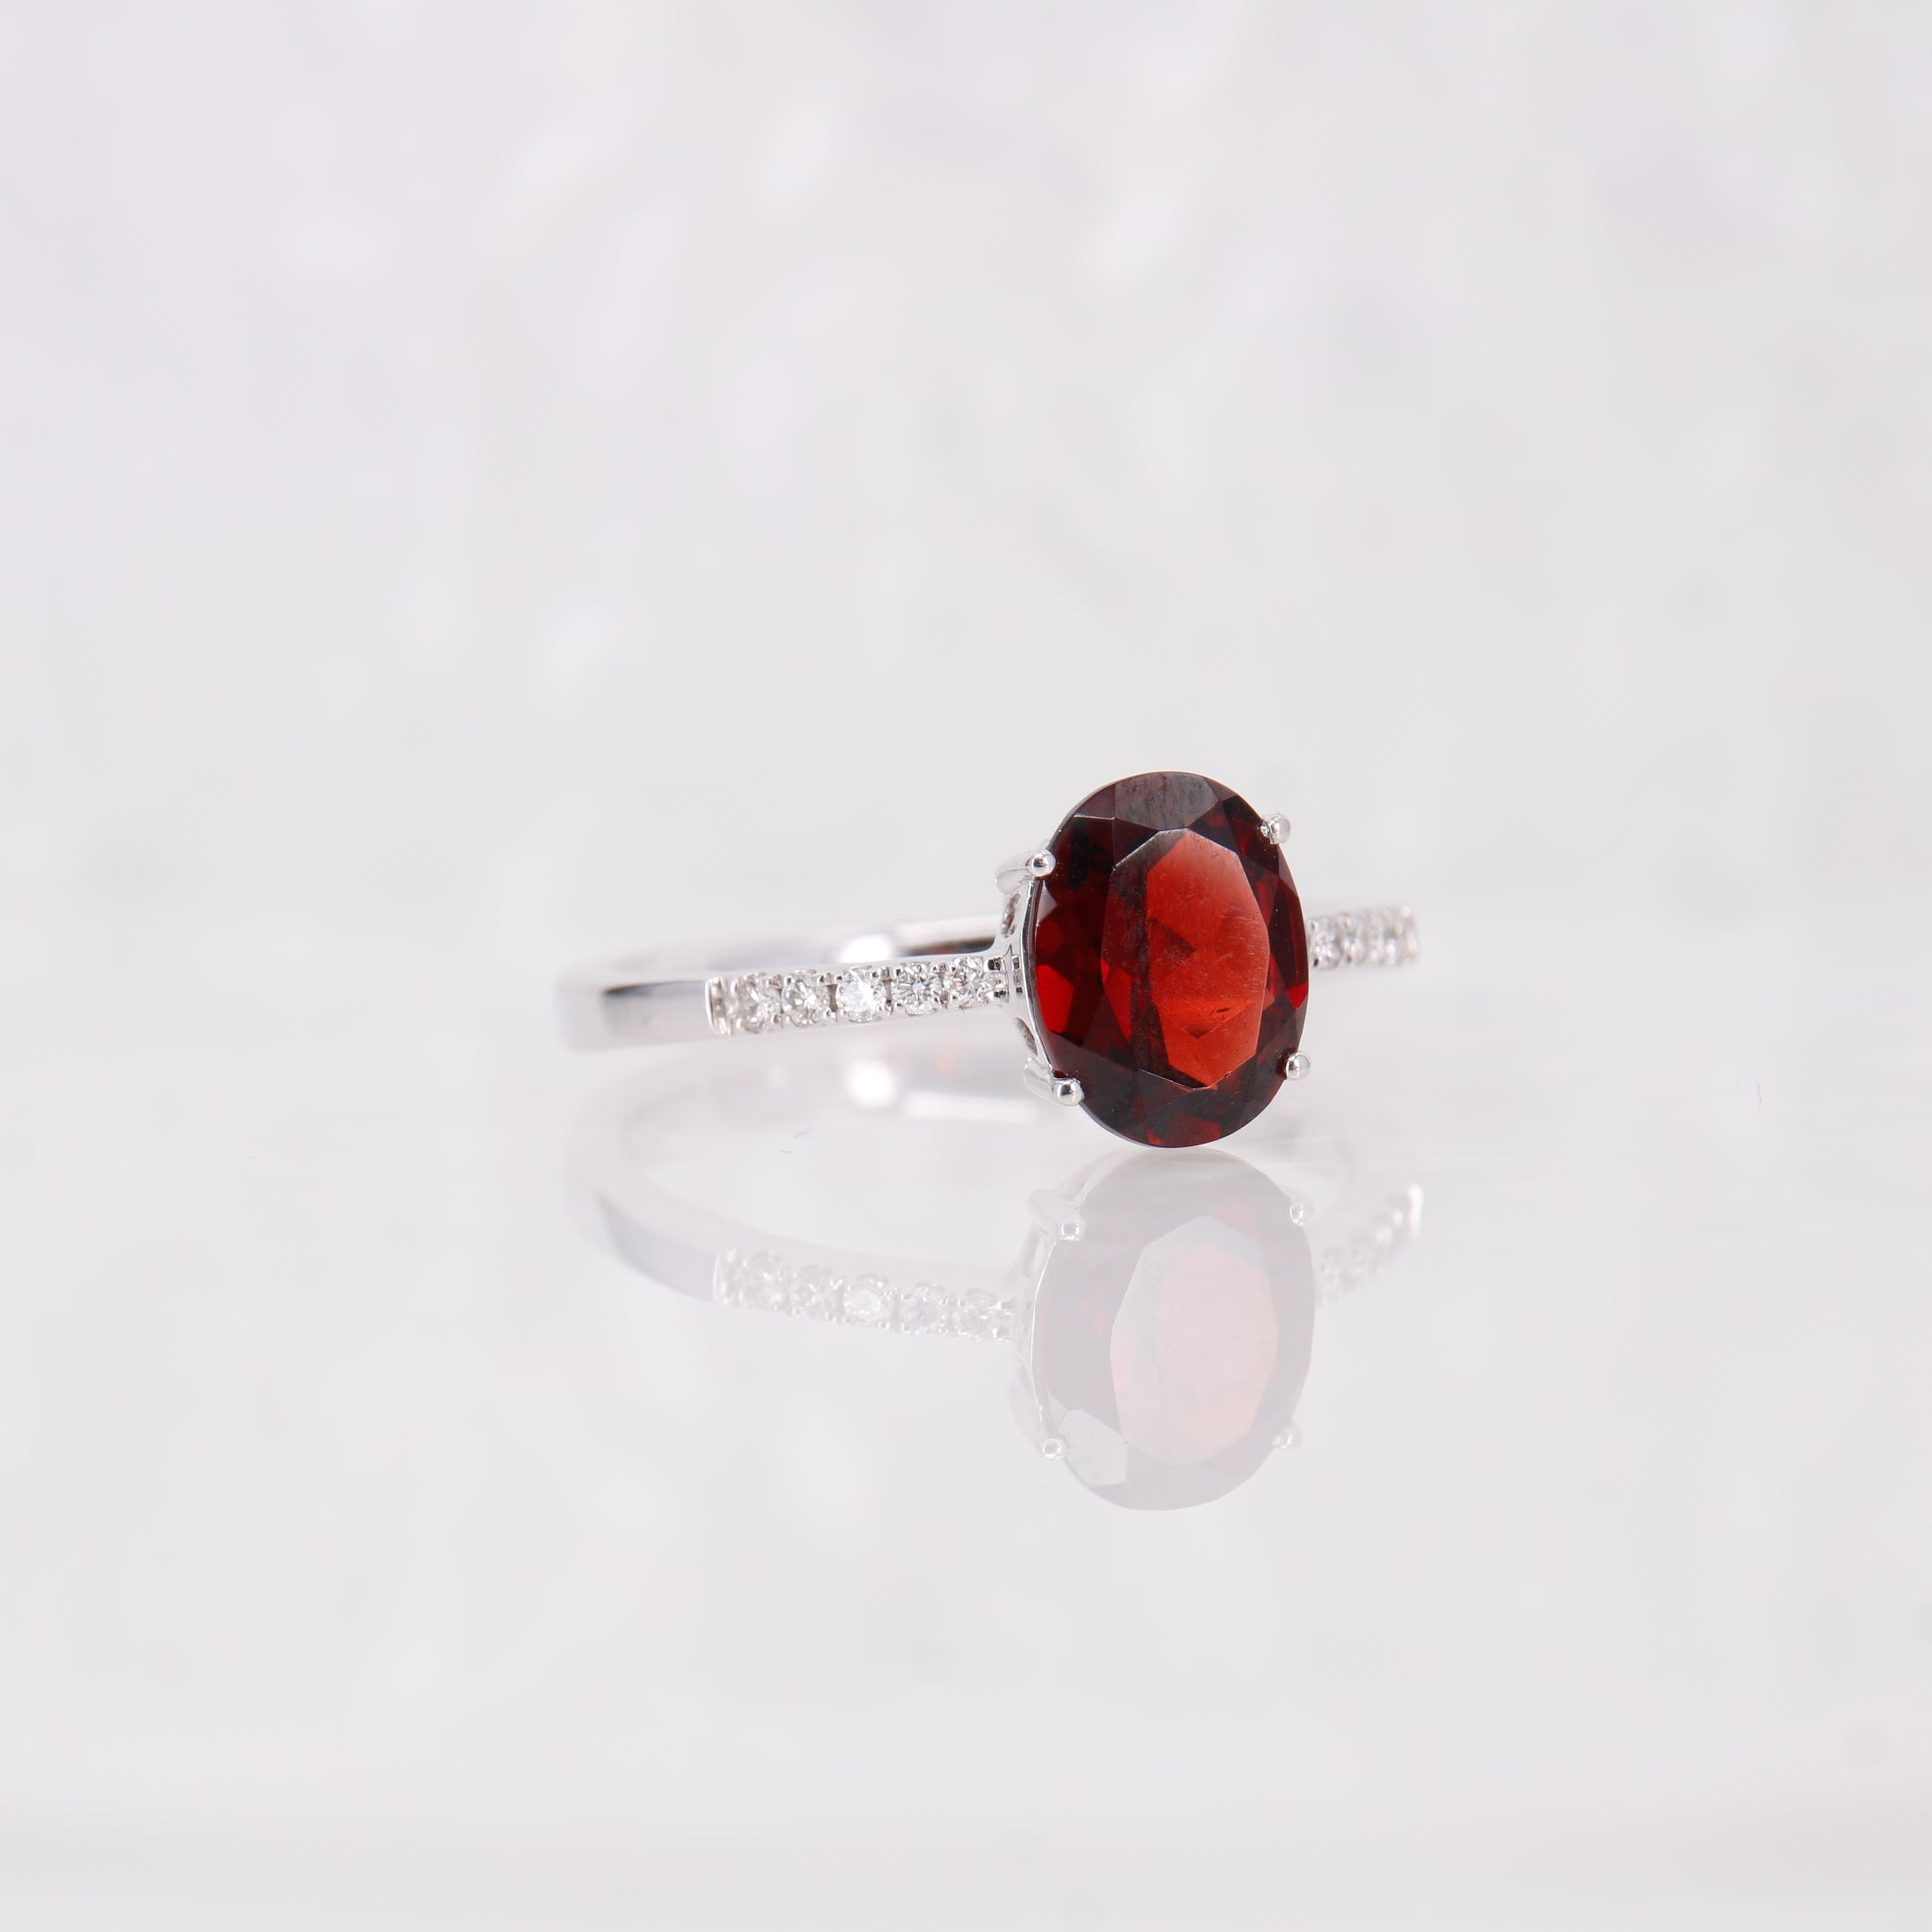 18ct White Gold Garnet and Diamond Engagement Ring. Oval Cut Garnet Ring with diamond shoulders.